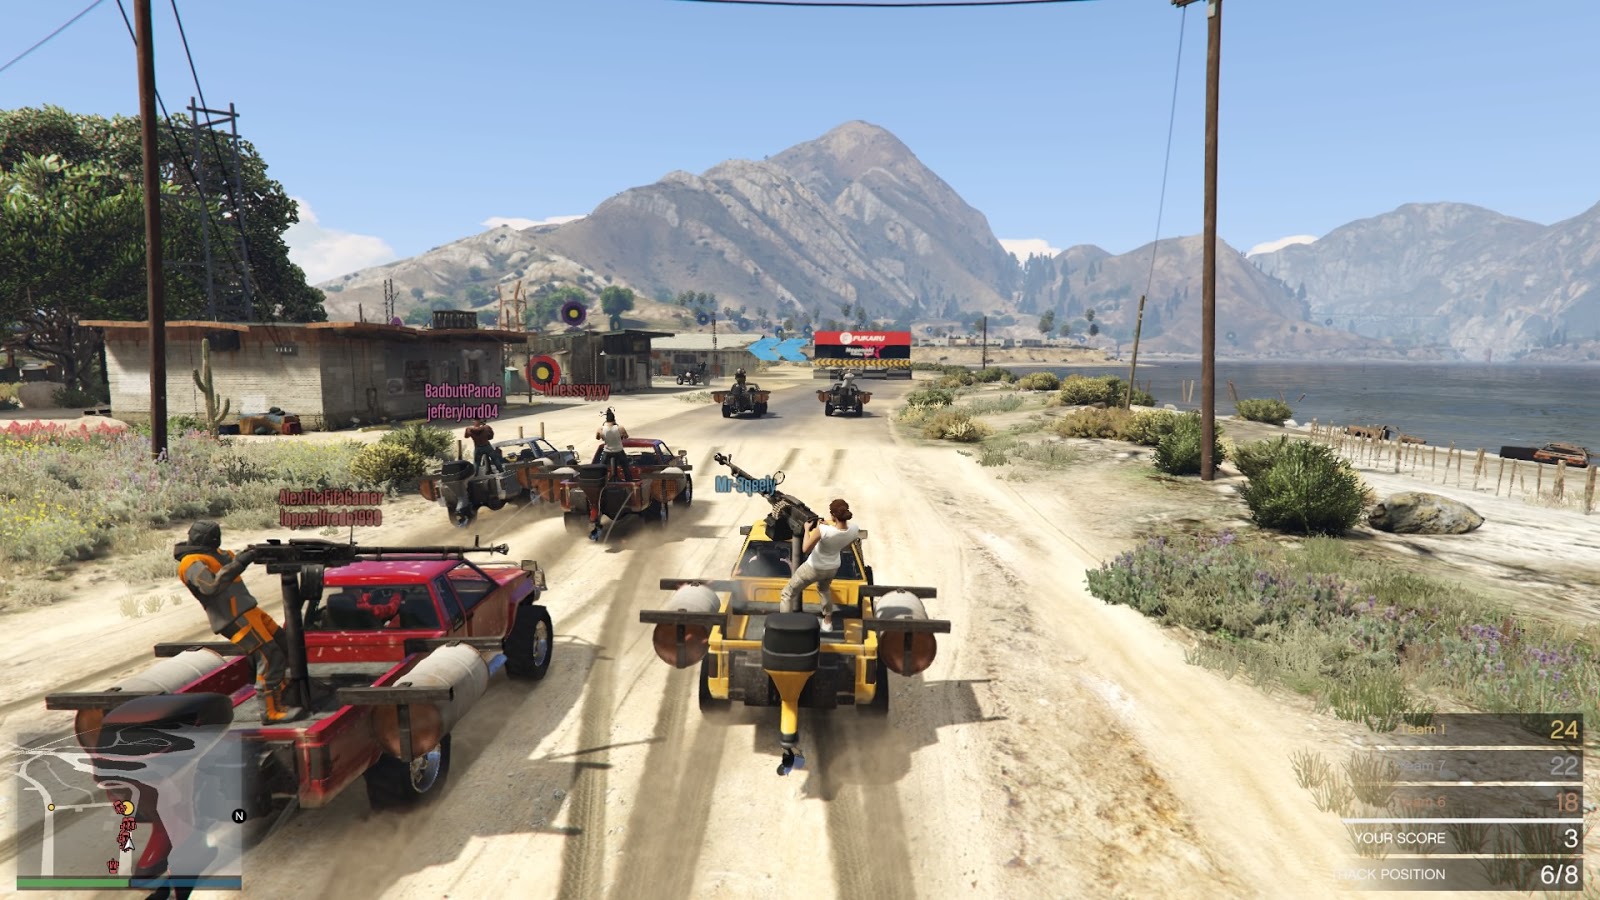 GTA Online Has A New Mode That’s Fun Even If You Play With Strangers